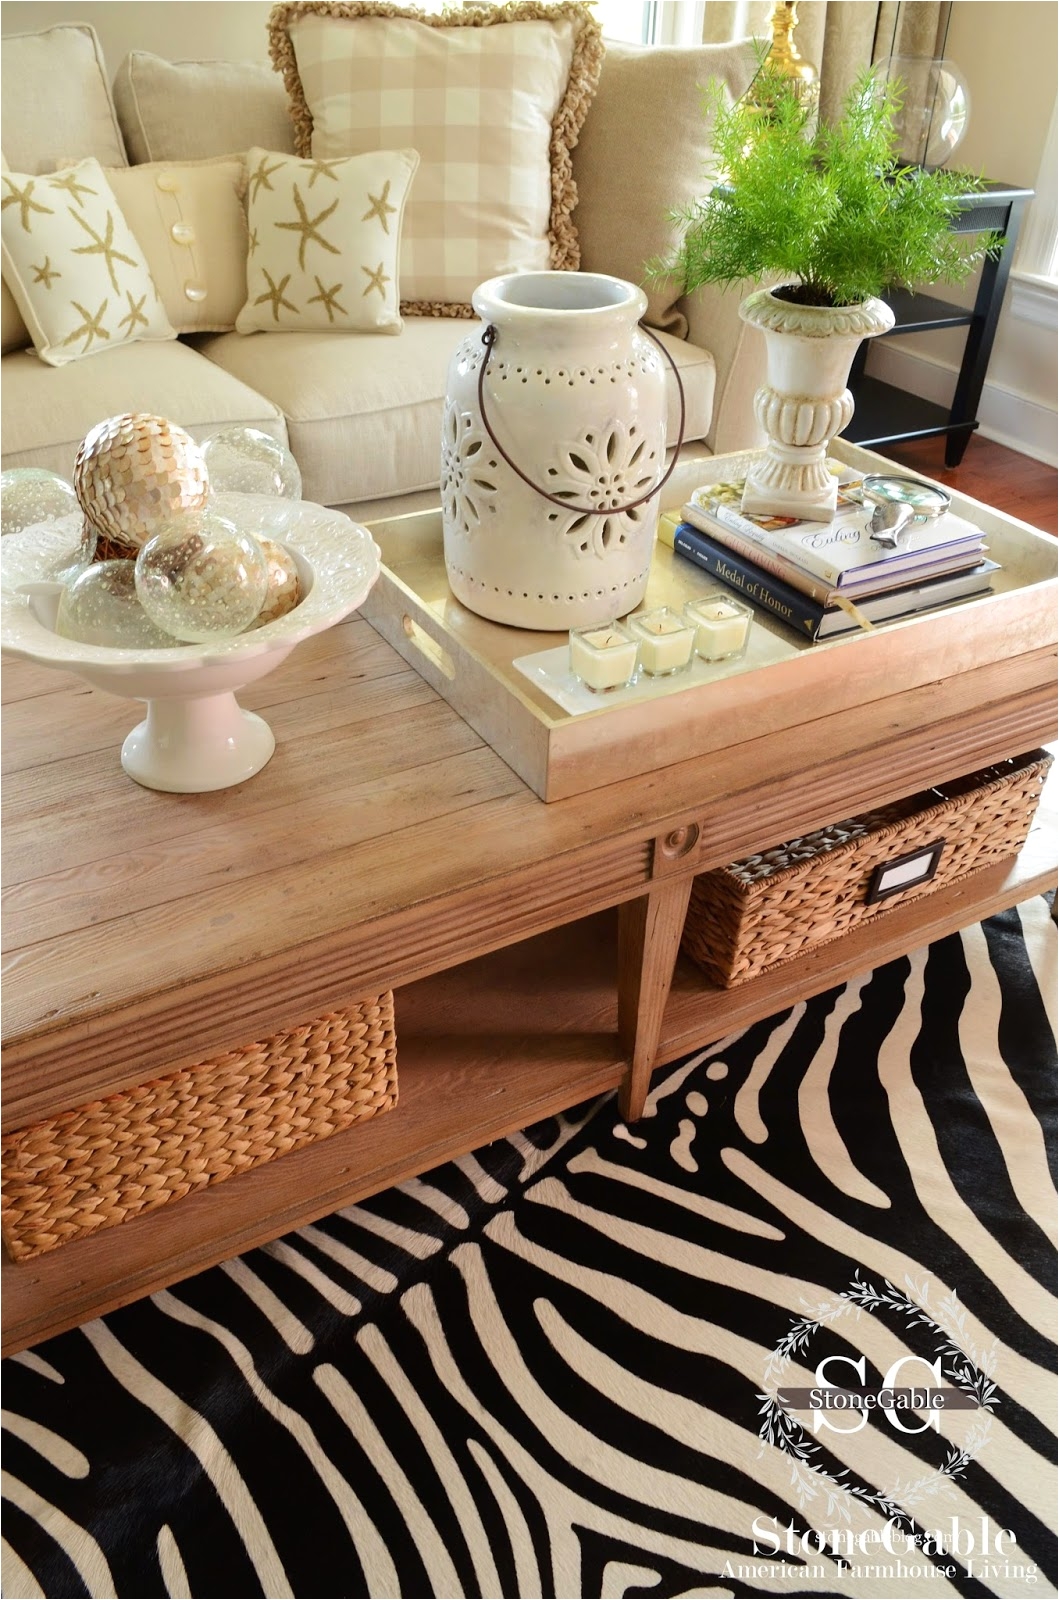 5 tips to style a coffee table like a pro